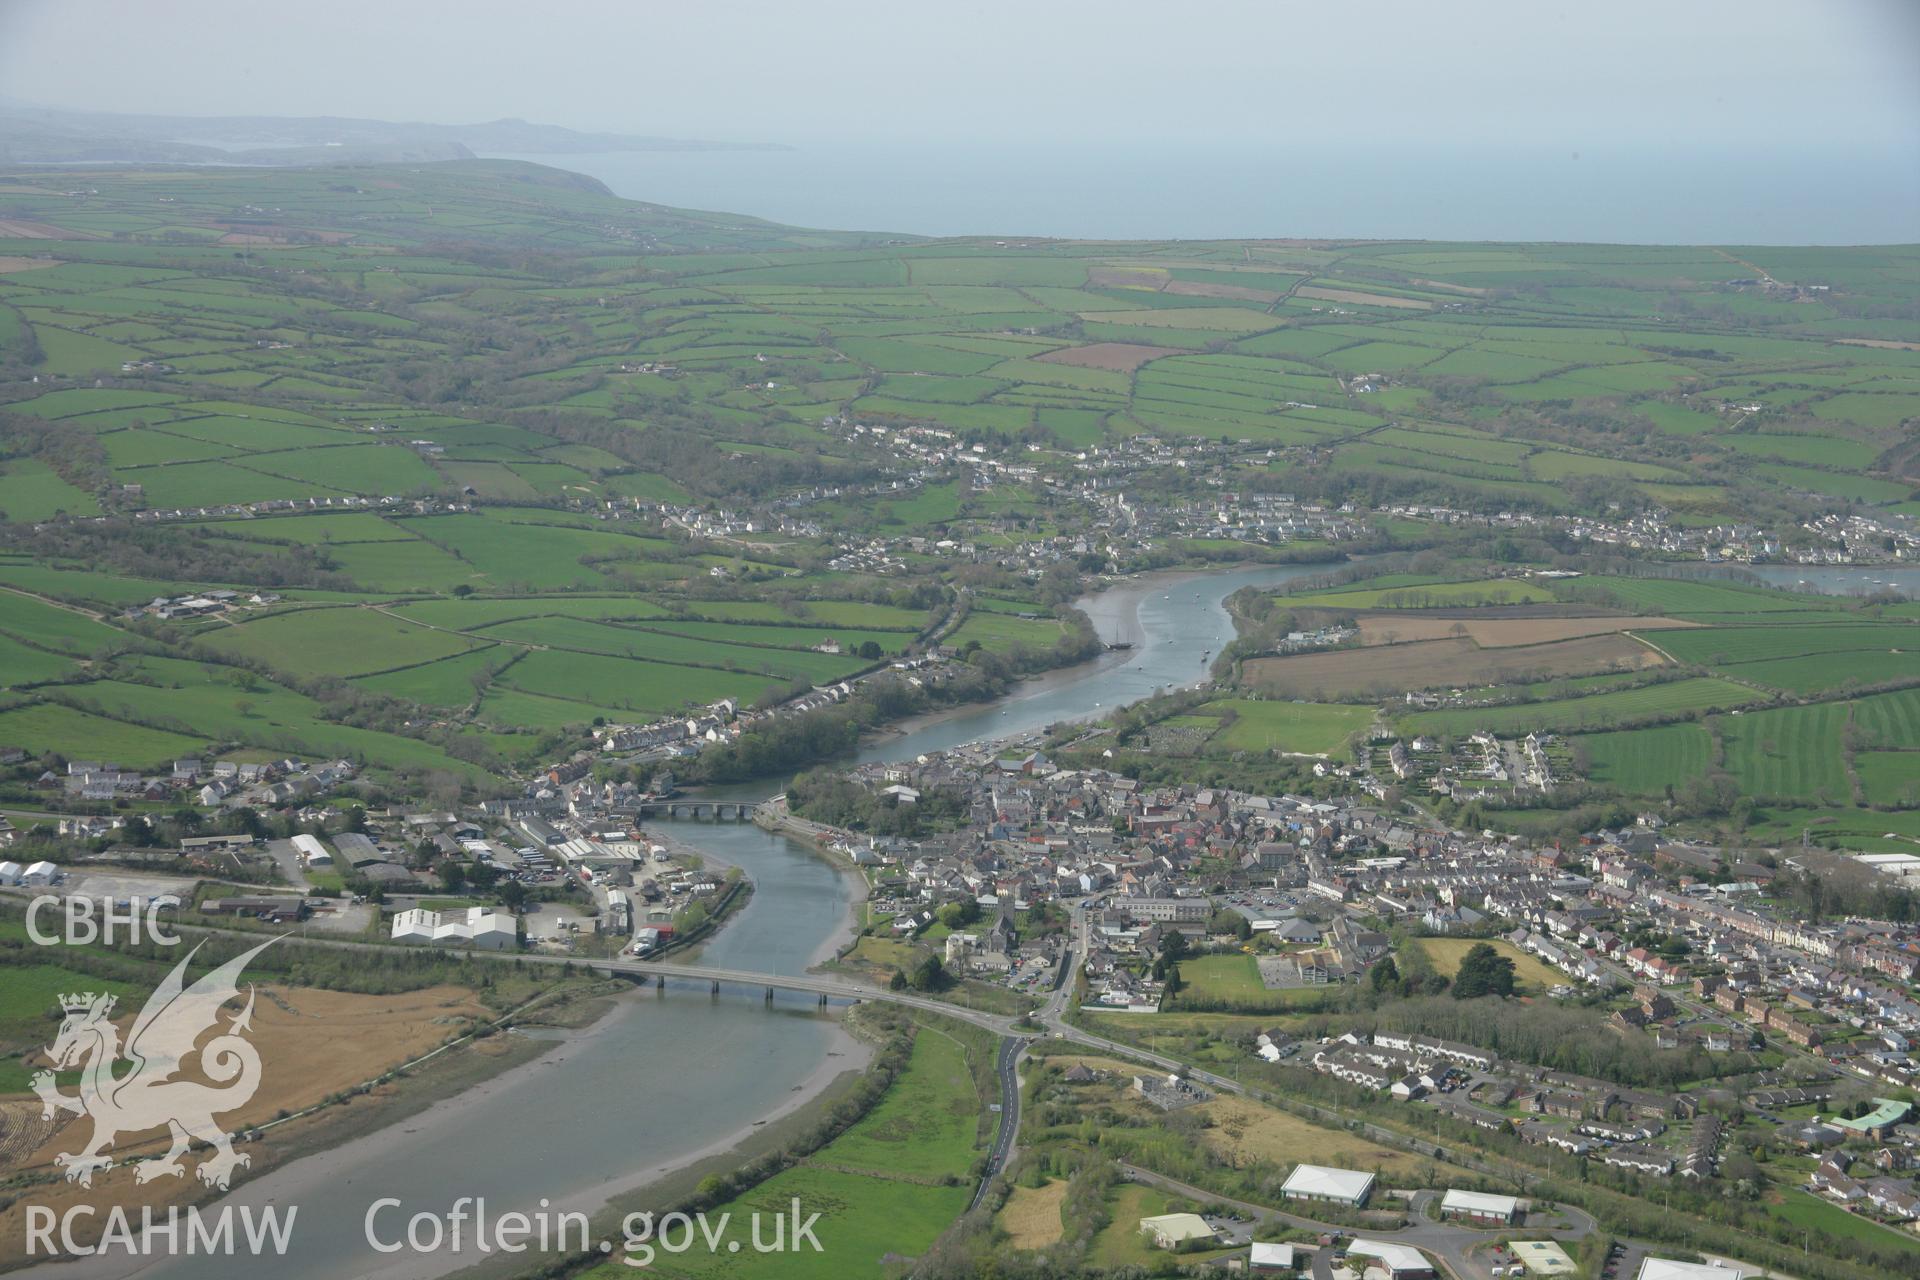 RCAHMW colour oblique aerial photograph of Cardigan. Taken on 17 April 2007 by Toby Driver